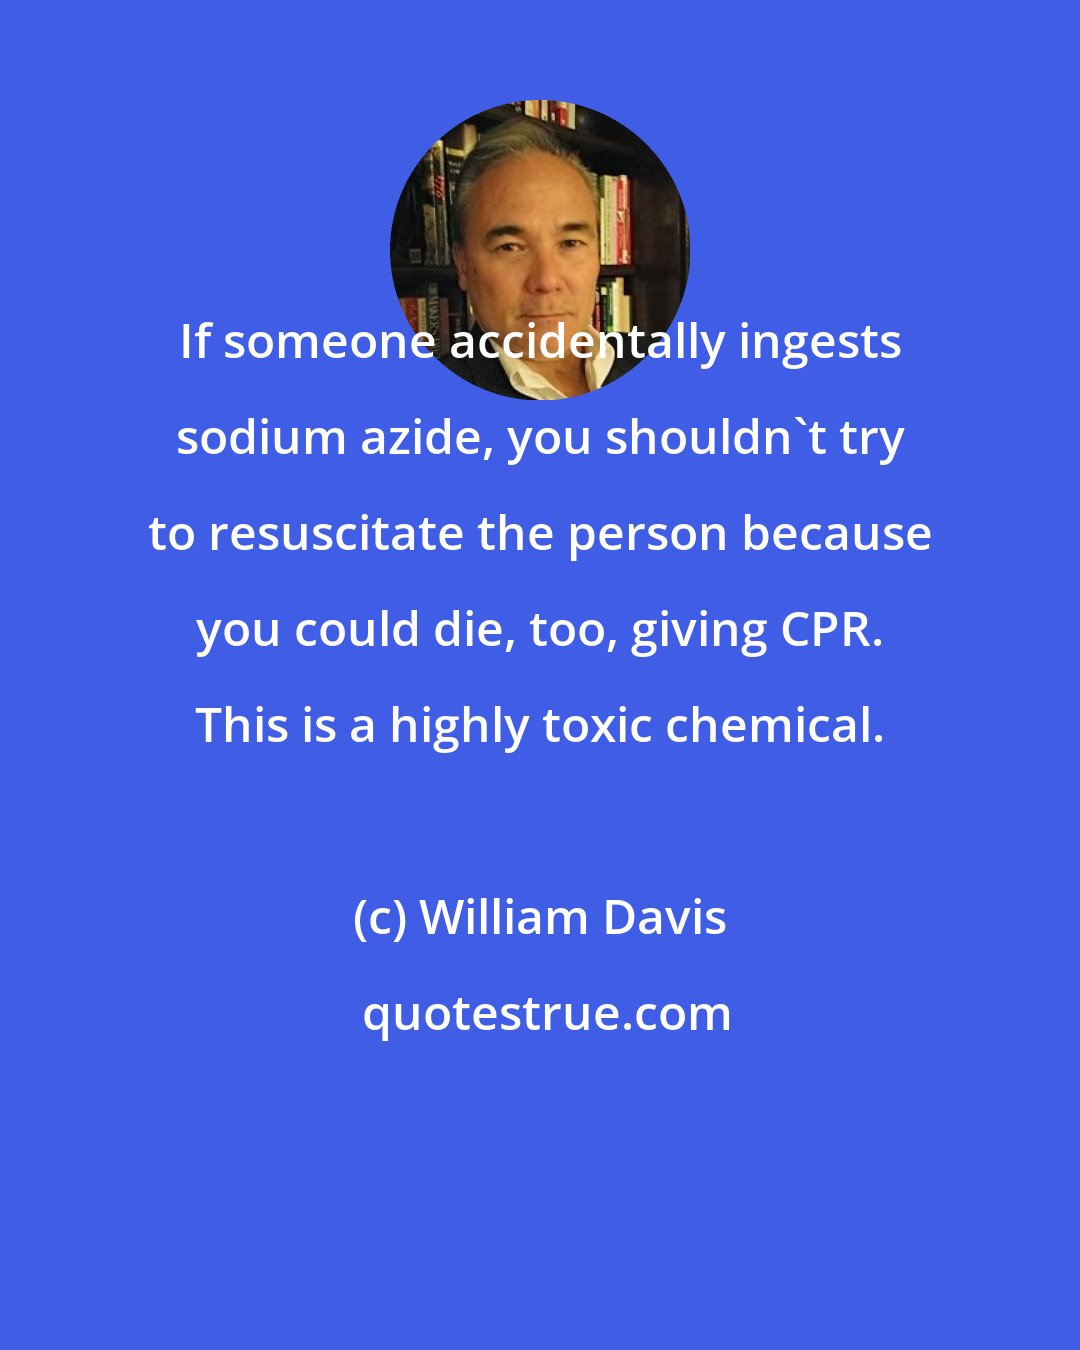 William Davis: If someone accidentally ingests sodium azide, you shouldn't try to resuscitate the person because you could die, too, giving CPR. This is a highly toxic chemical.